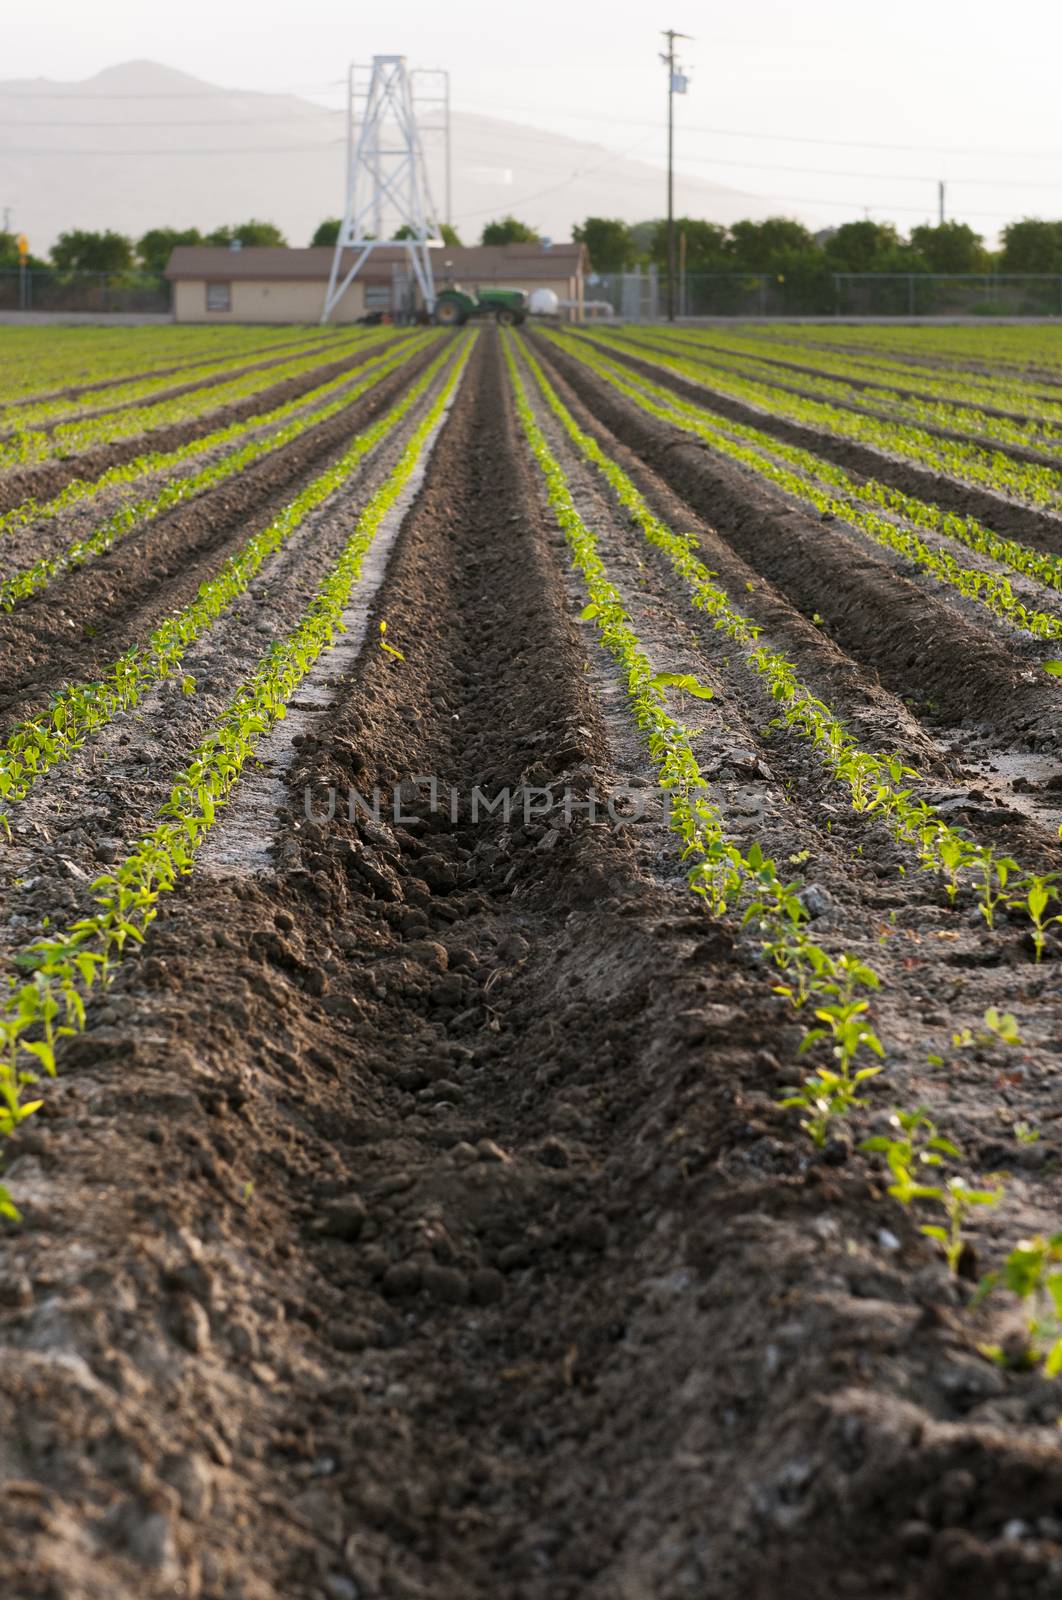 Rows of seedlings, farmland with tractor in the distance